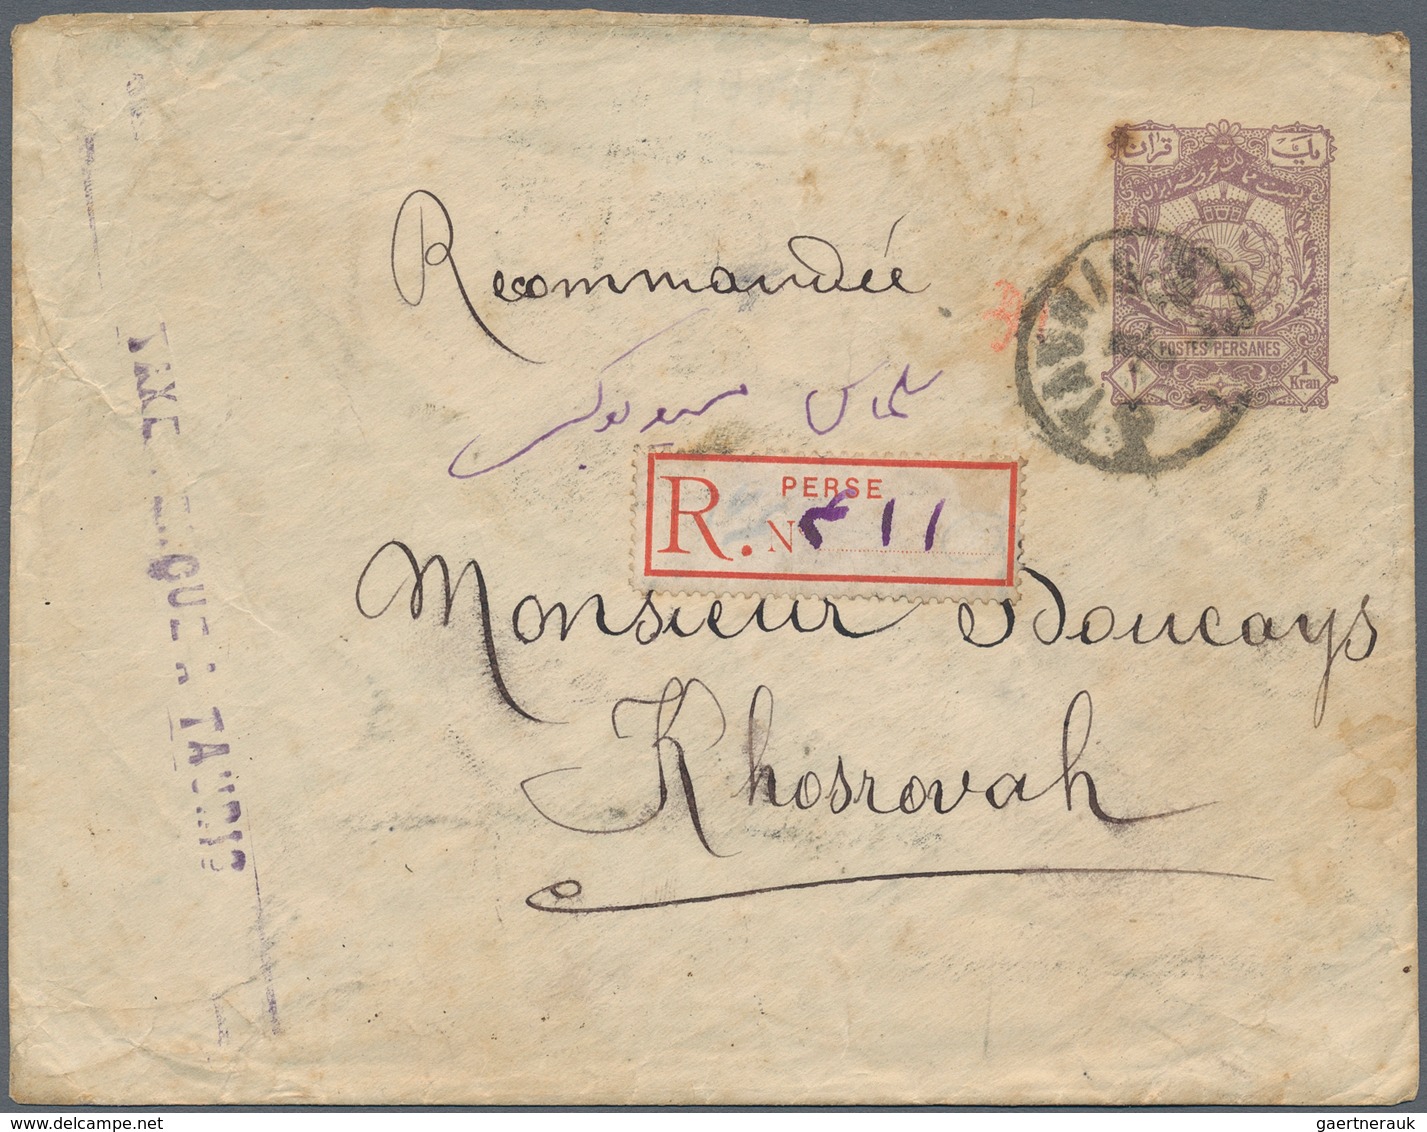 Iran: 1888-1904: Collection of 79 postal stationery envelopes of the various issues, unused and used